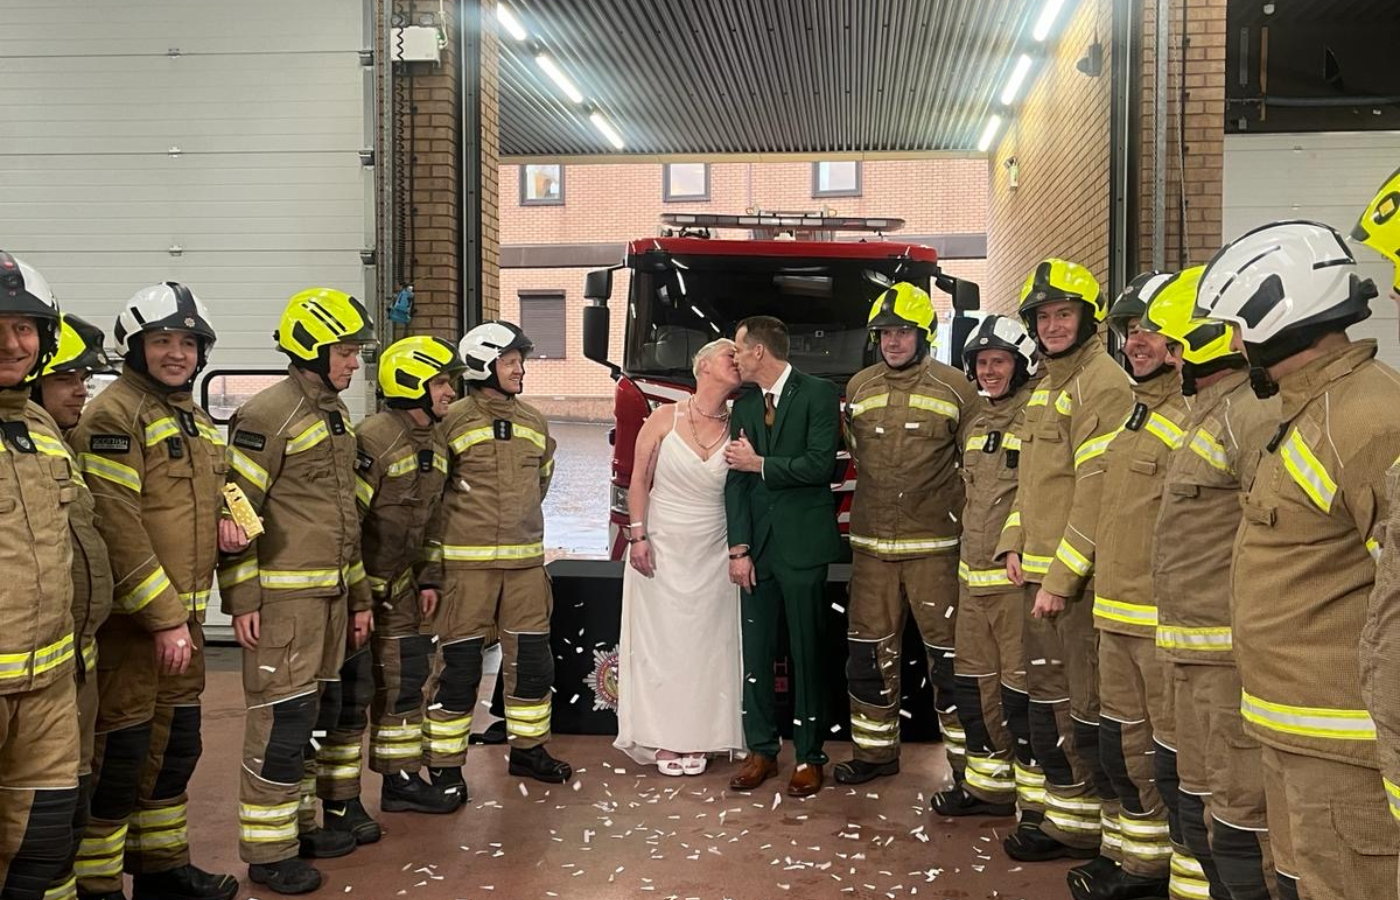 SFRS staff watched as the happy couple exchanged their vows at Calton Community Fire Station in Glasgow.